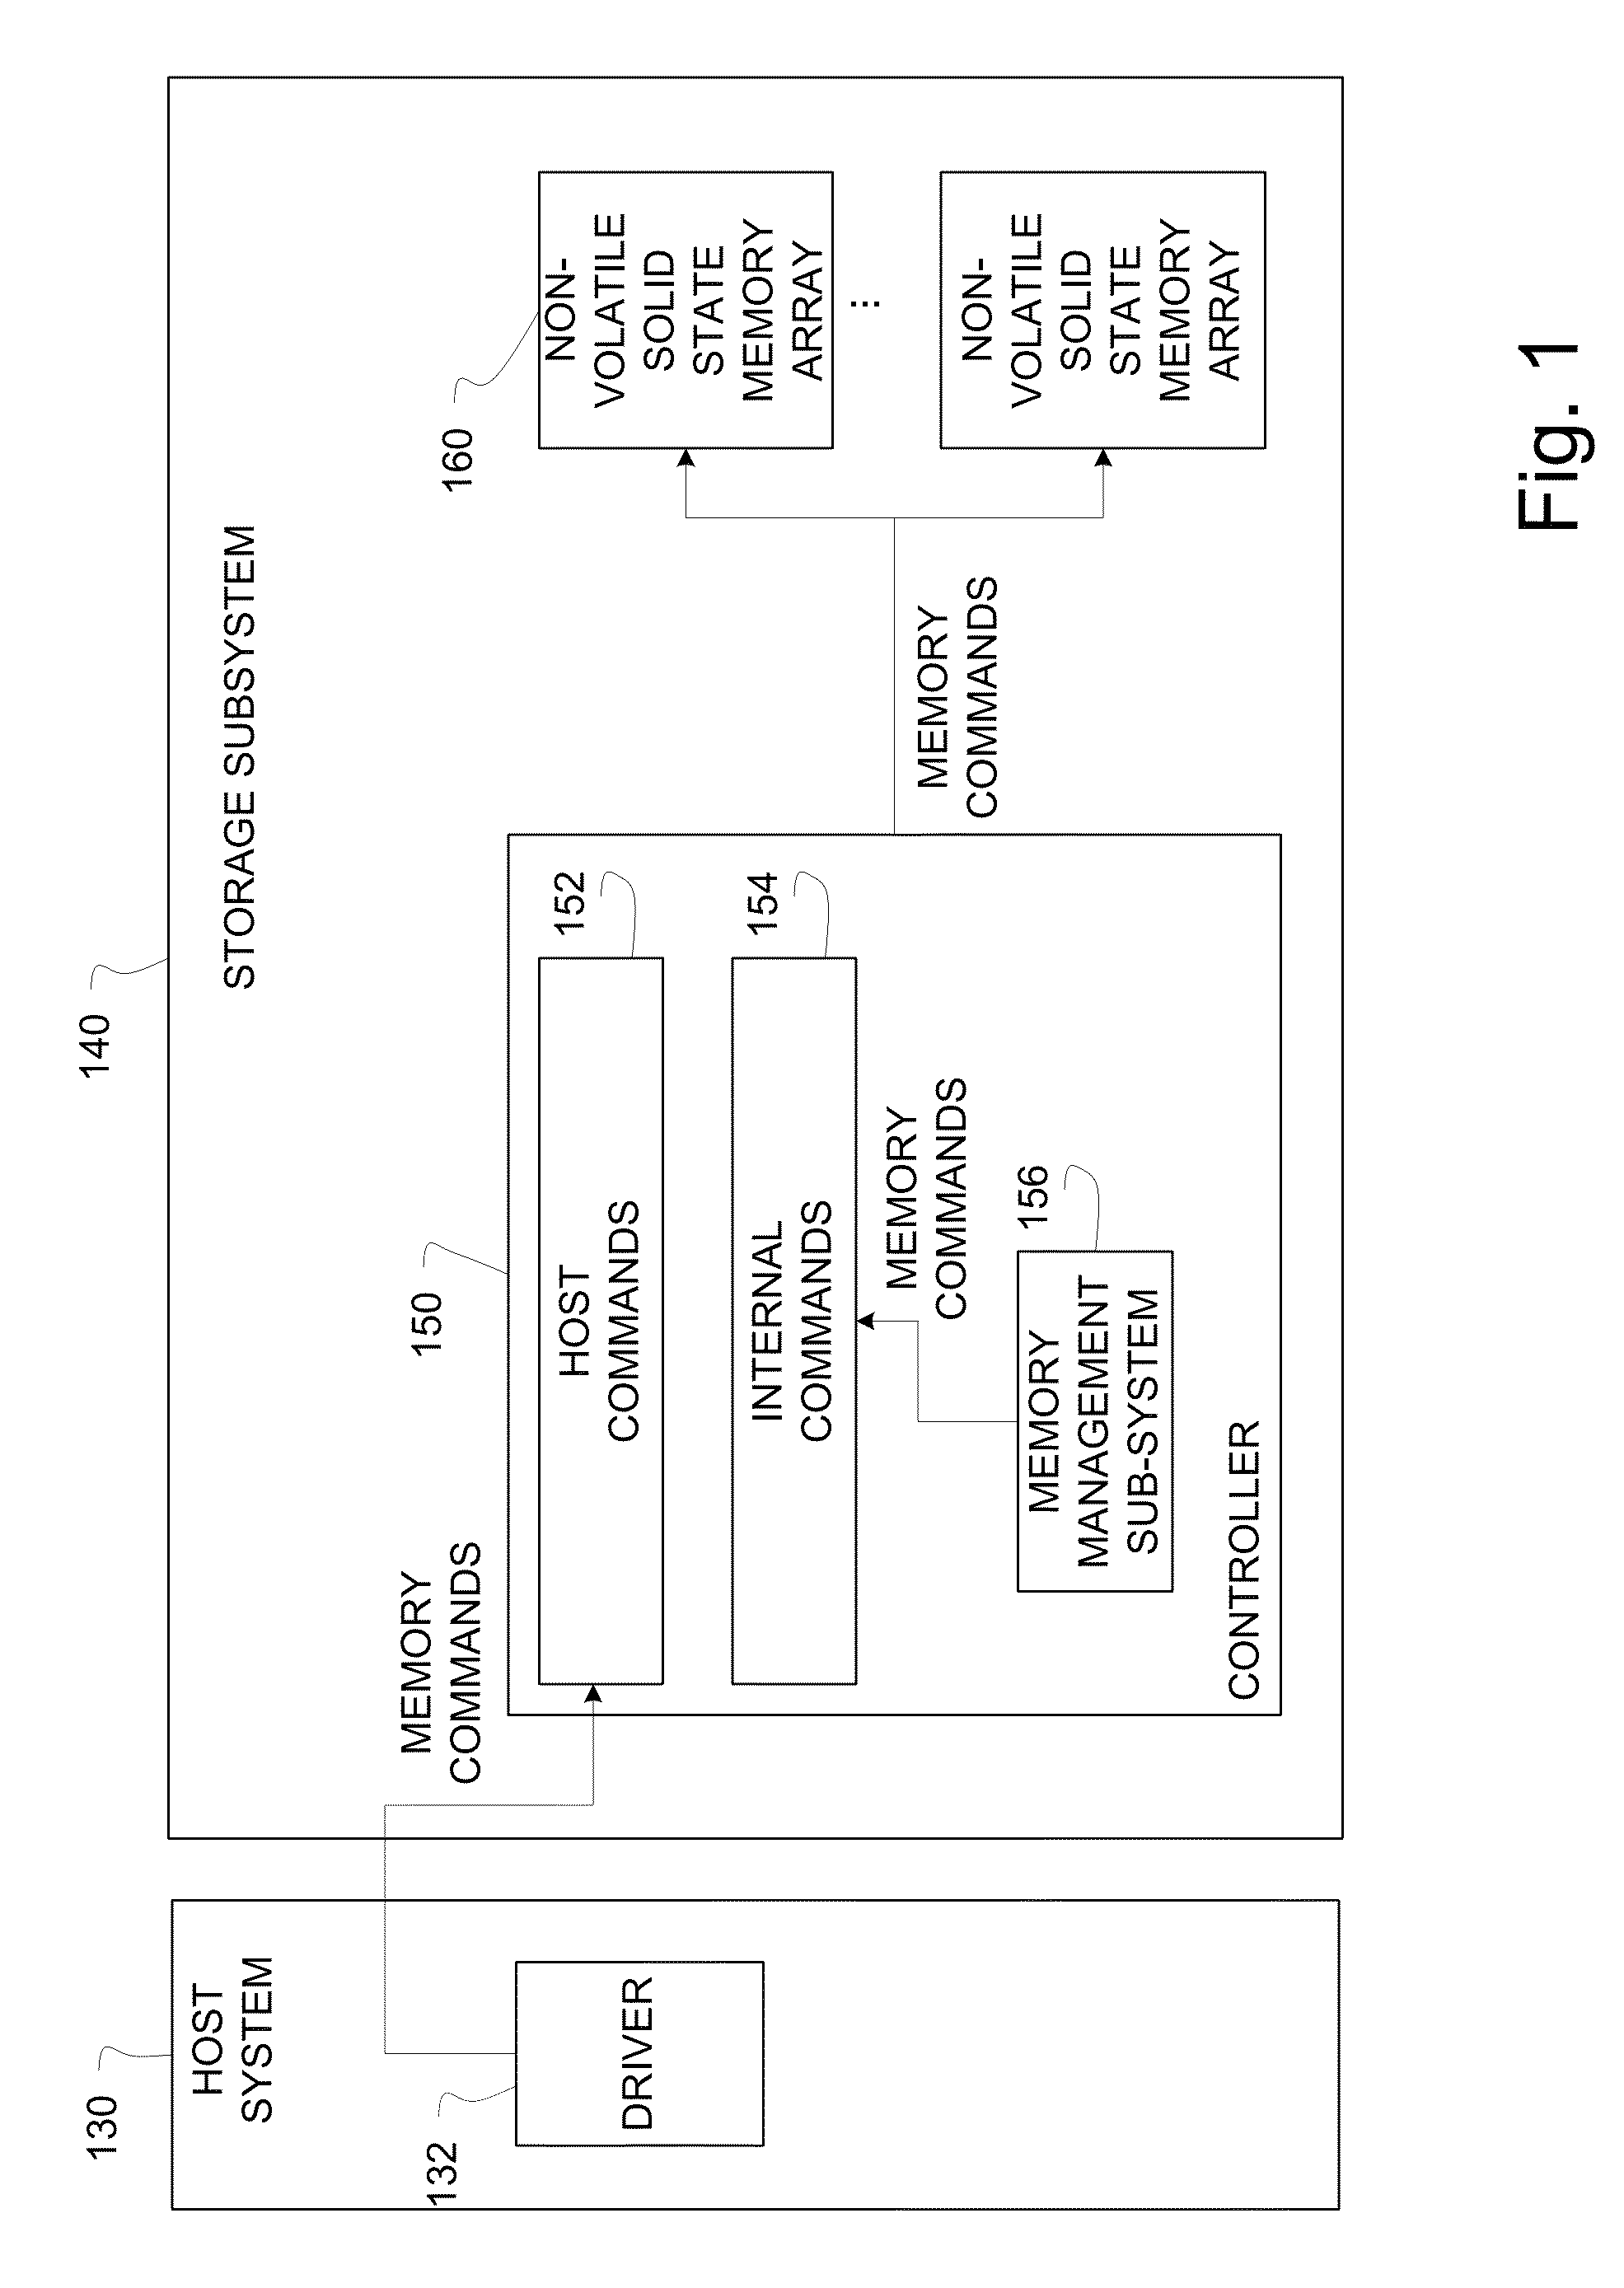 System and method for reducing contentions in solid-state memory access